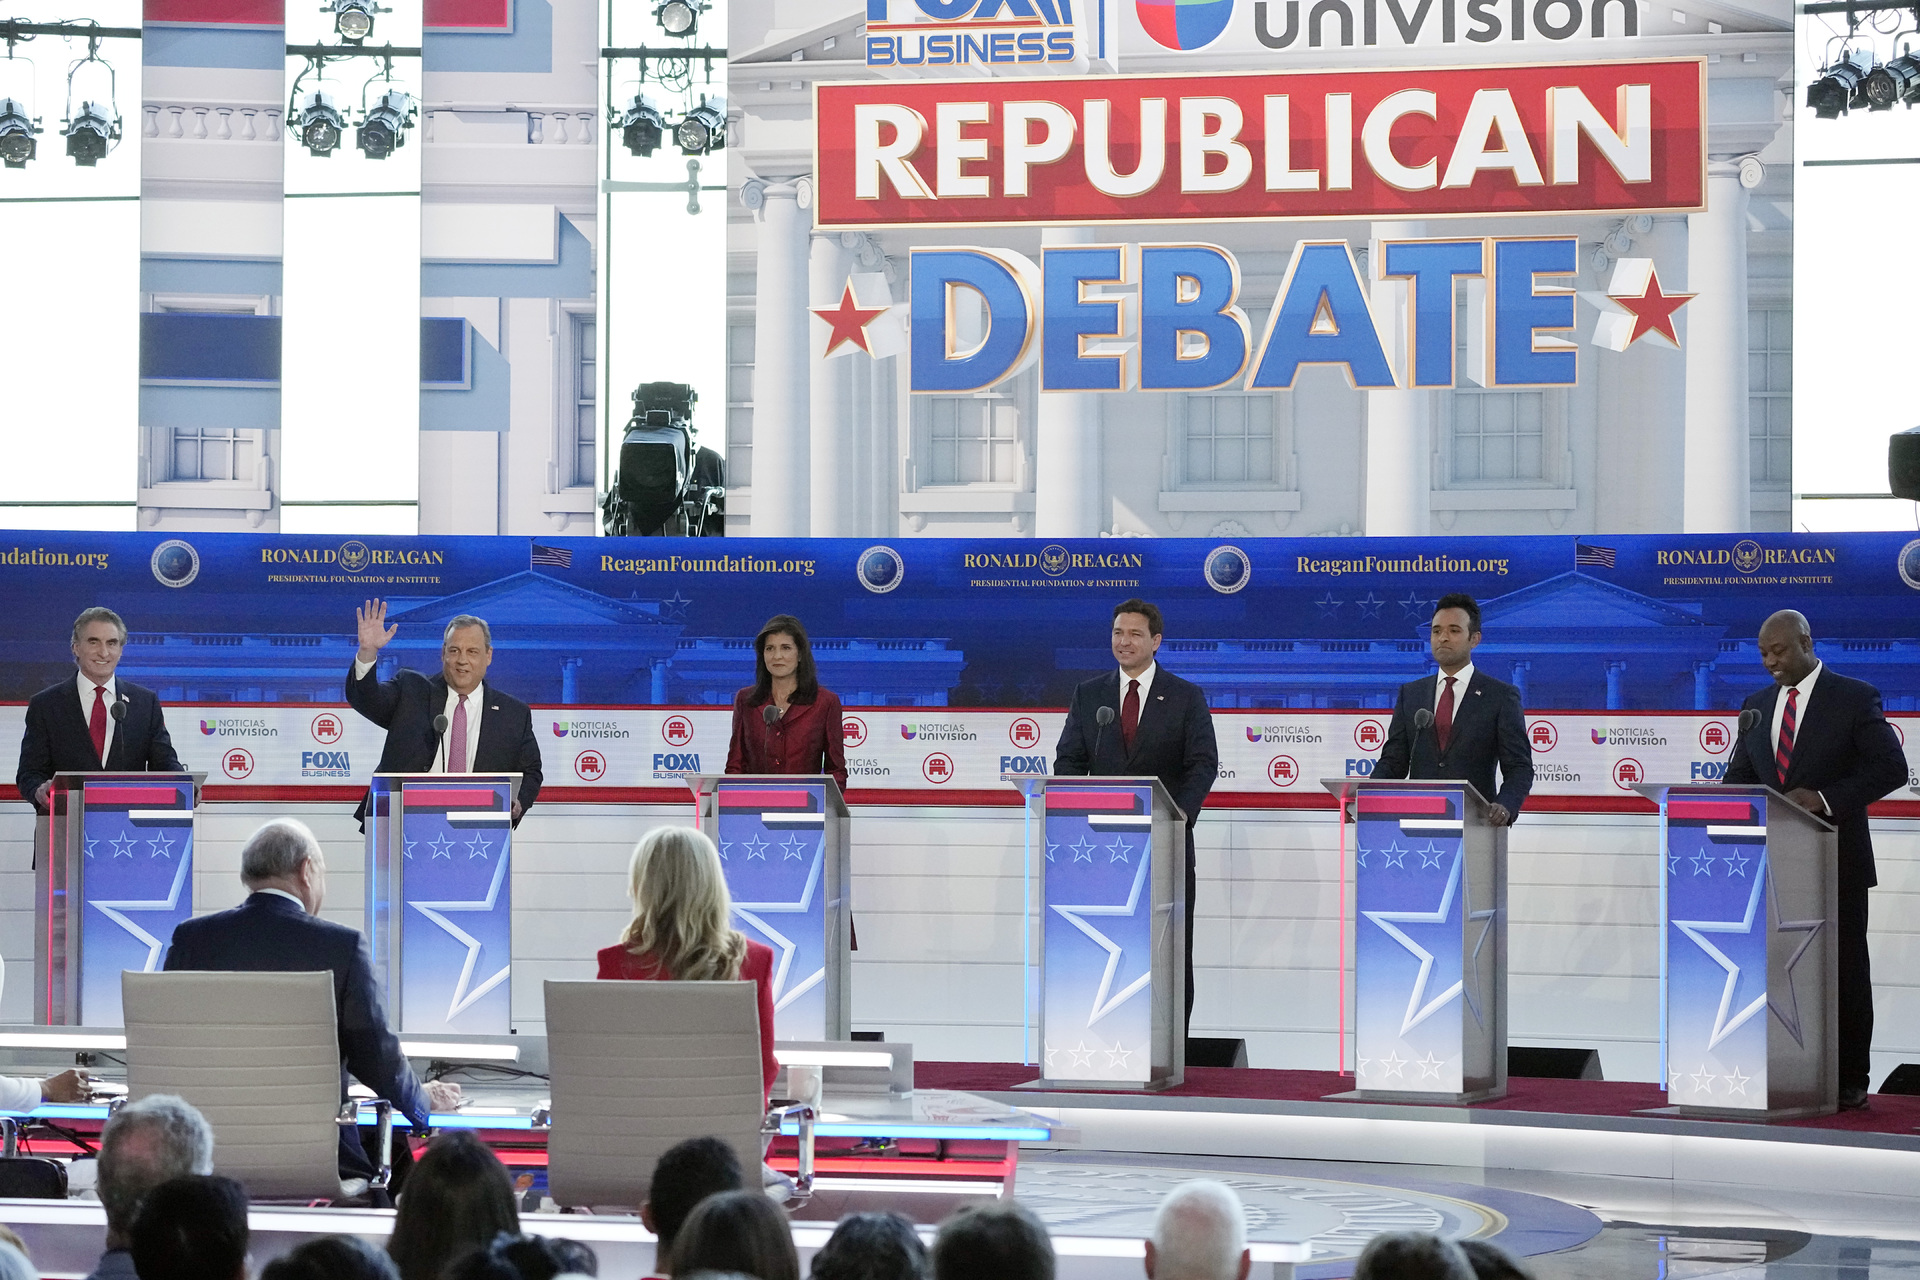 Second debate of Republican candidates in the United States